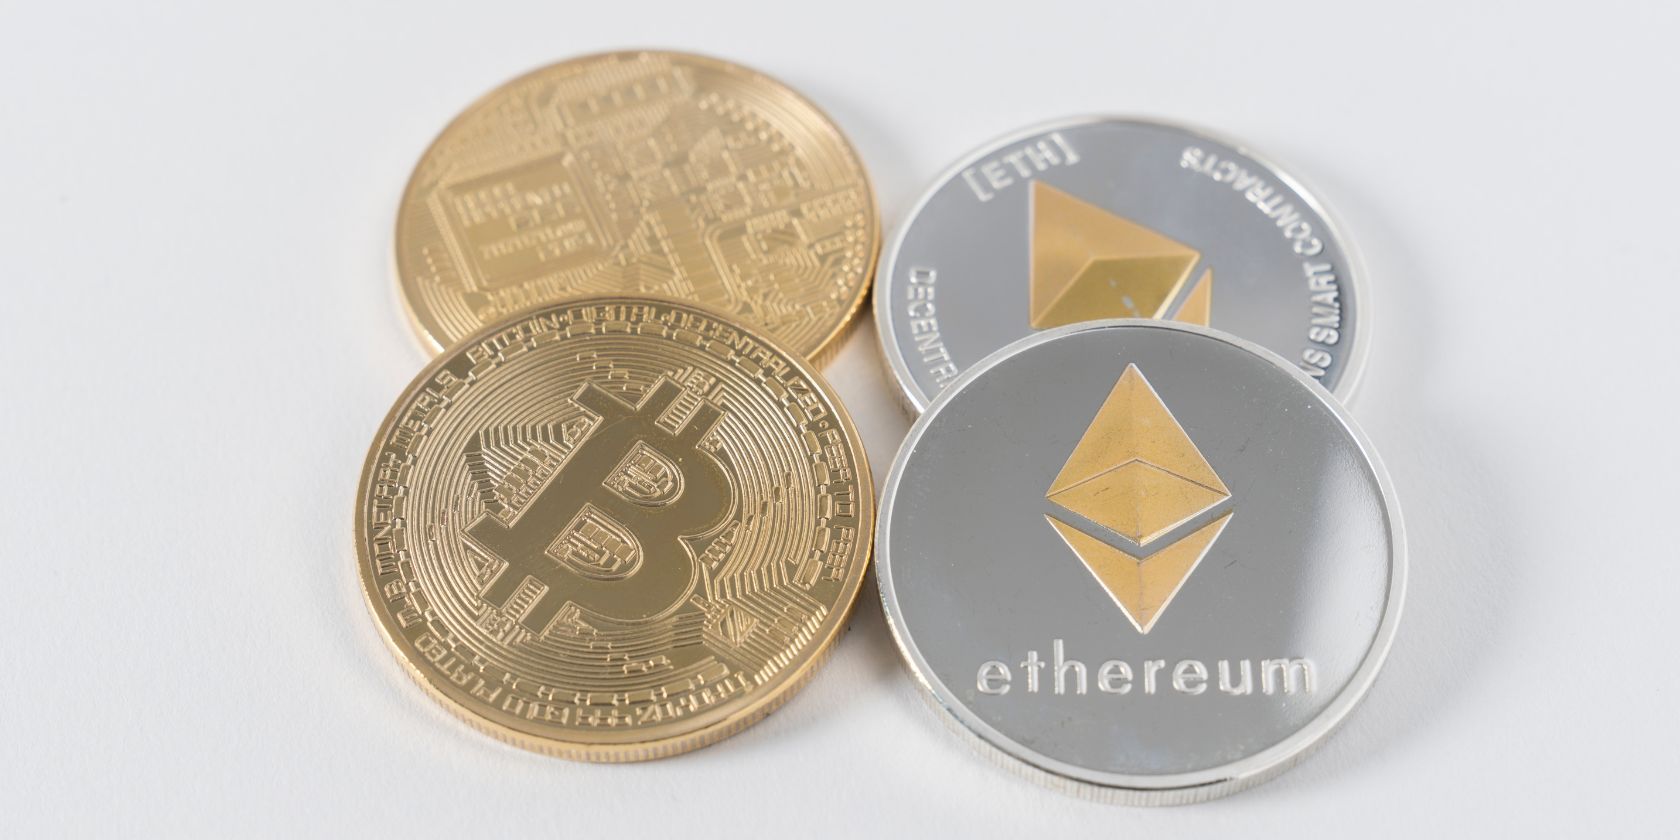 pairs of bitcoin and ethereum coins side by side